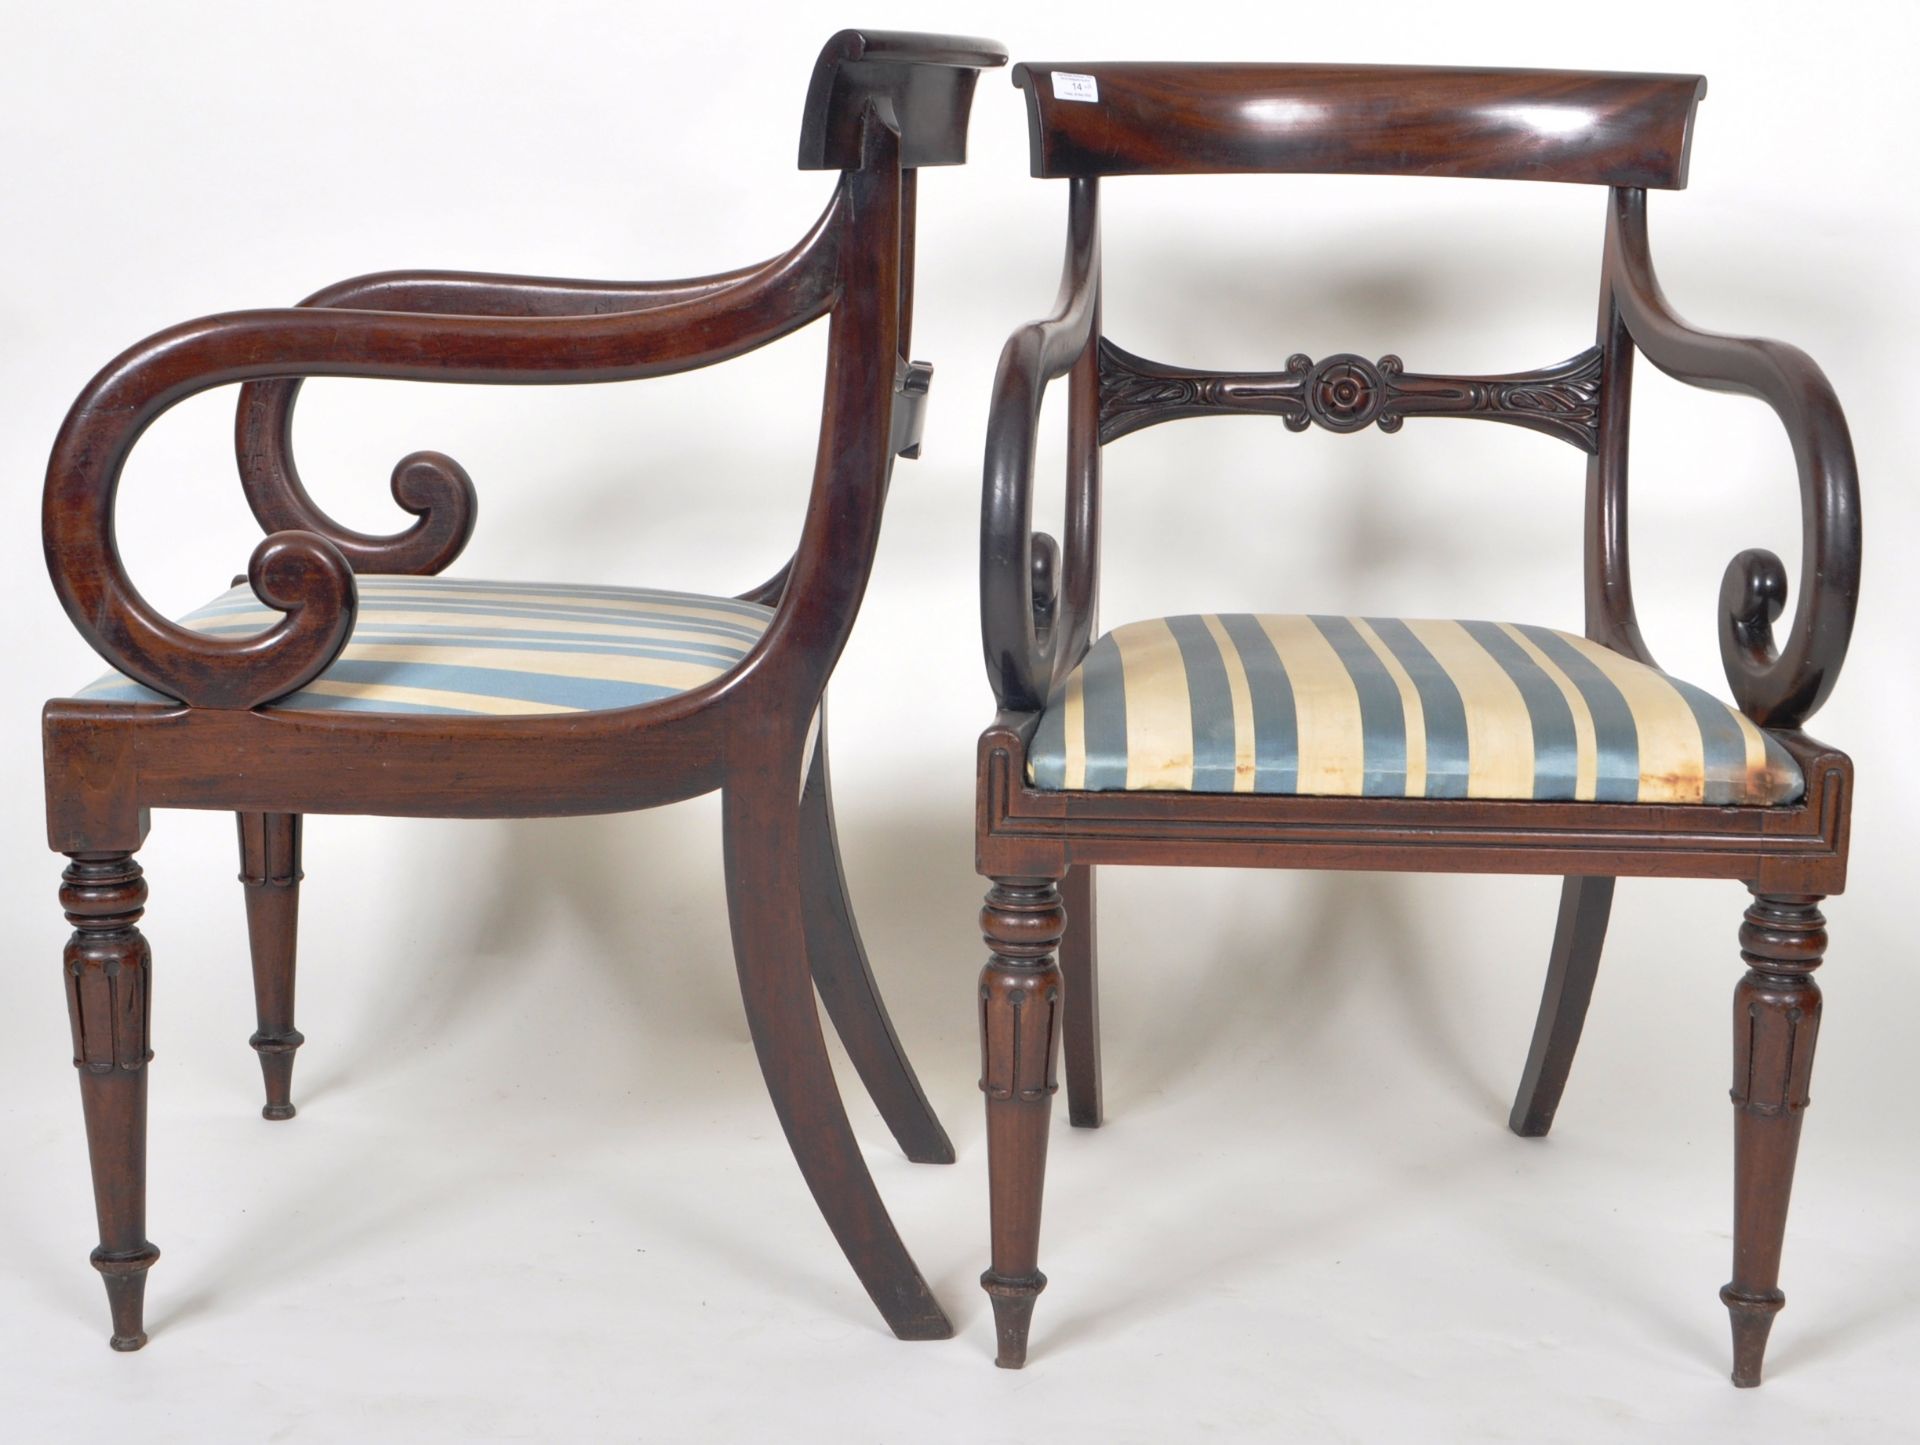 PAIR OF REGENCY MAHOGANY GILLOW MANNER ARMCHAIRS - Image 8 of 8